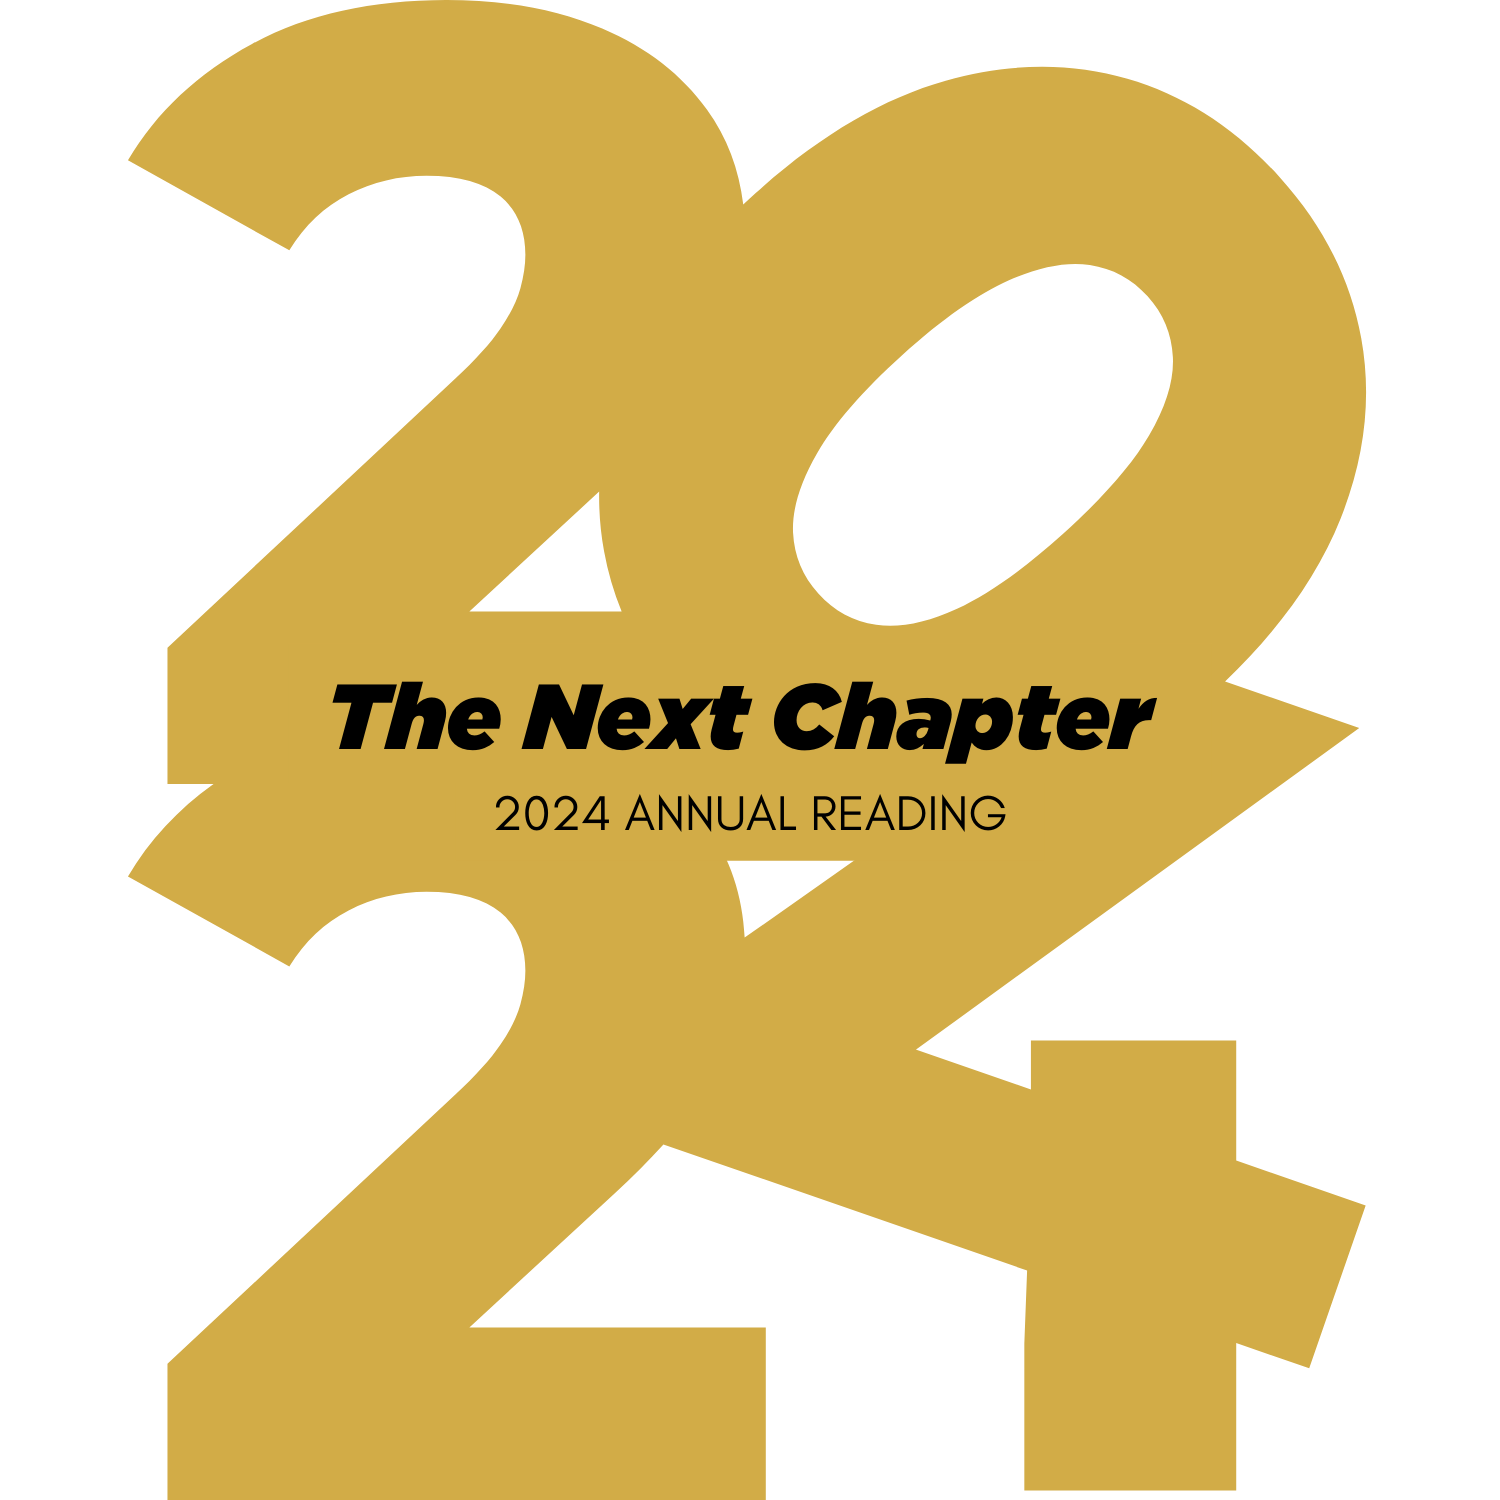 The Next Chapter | 2024 Annual Reading